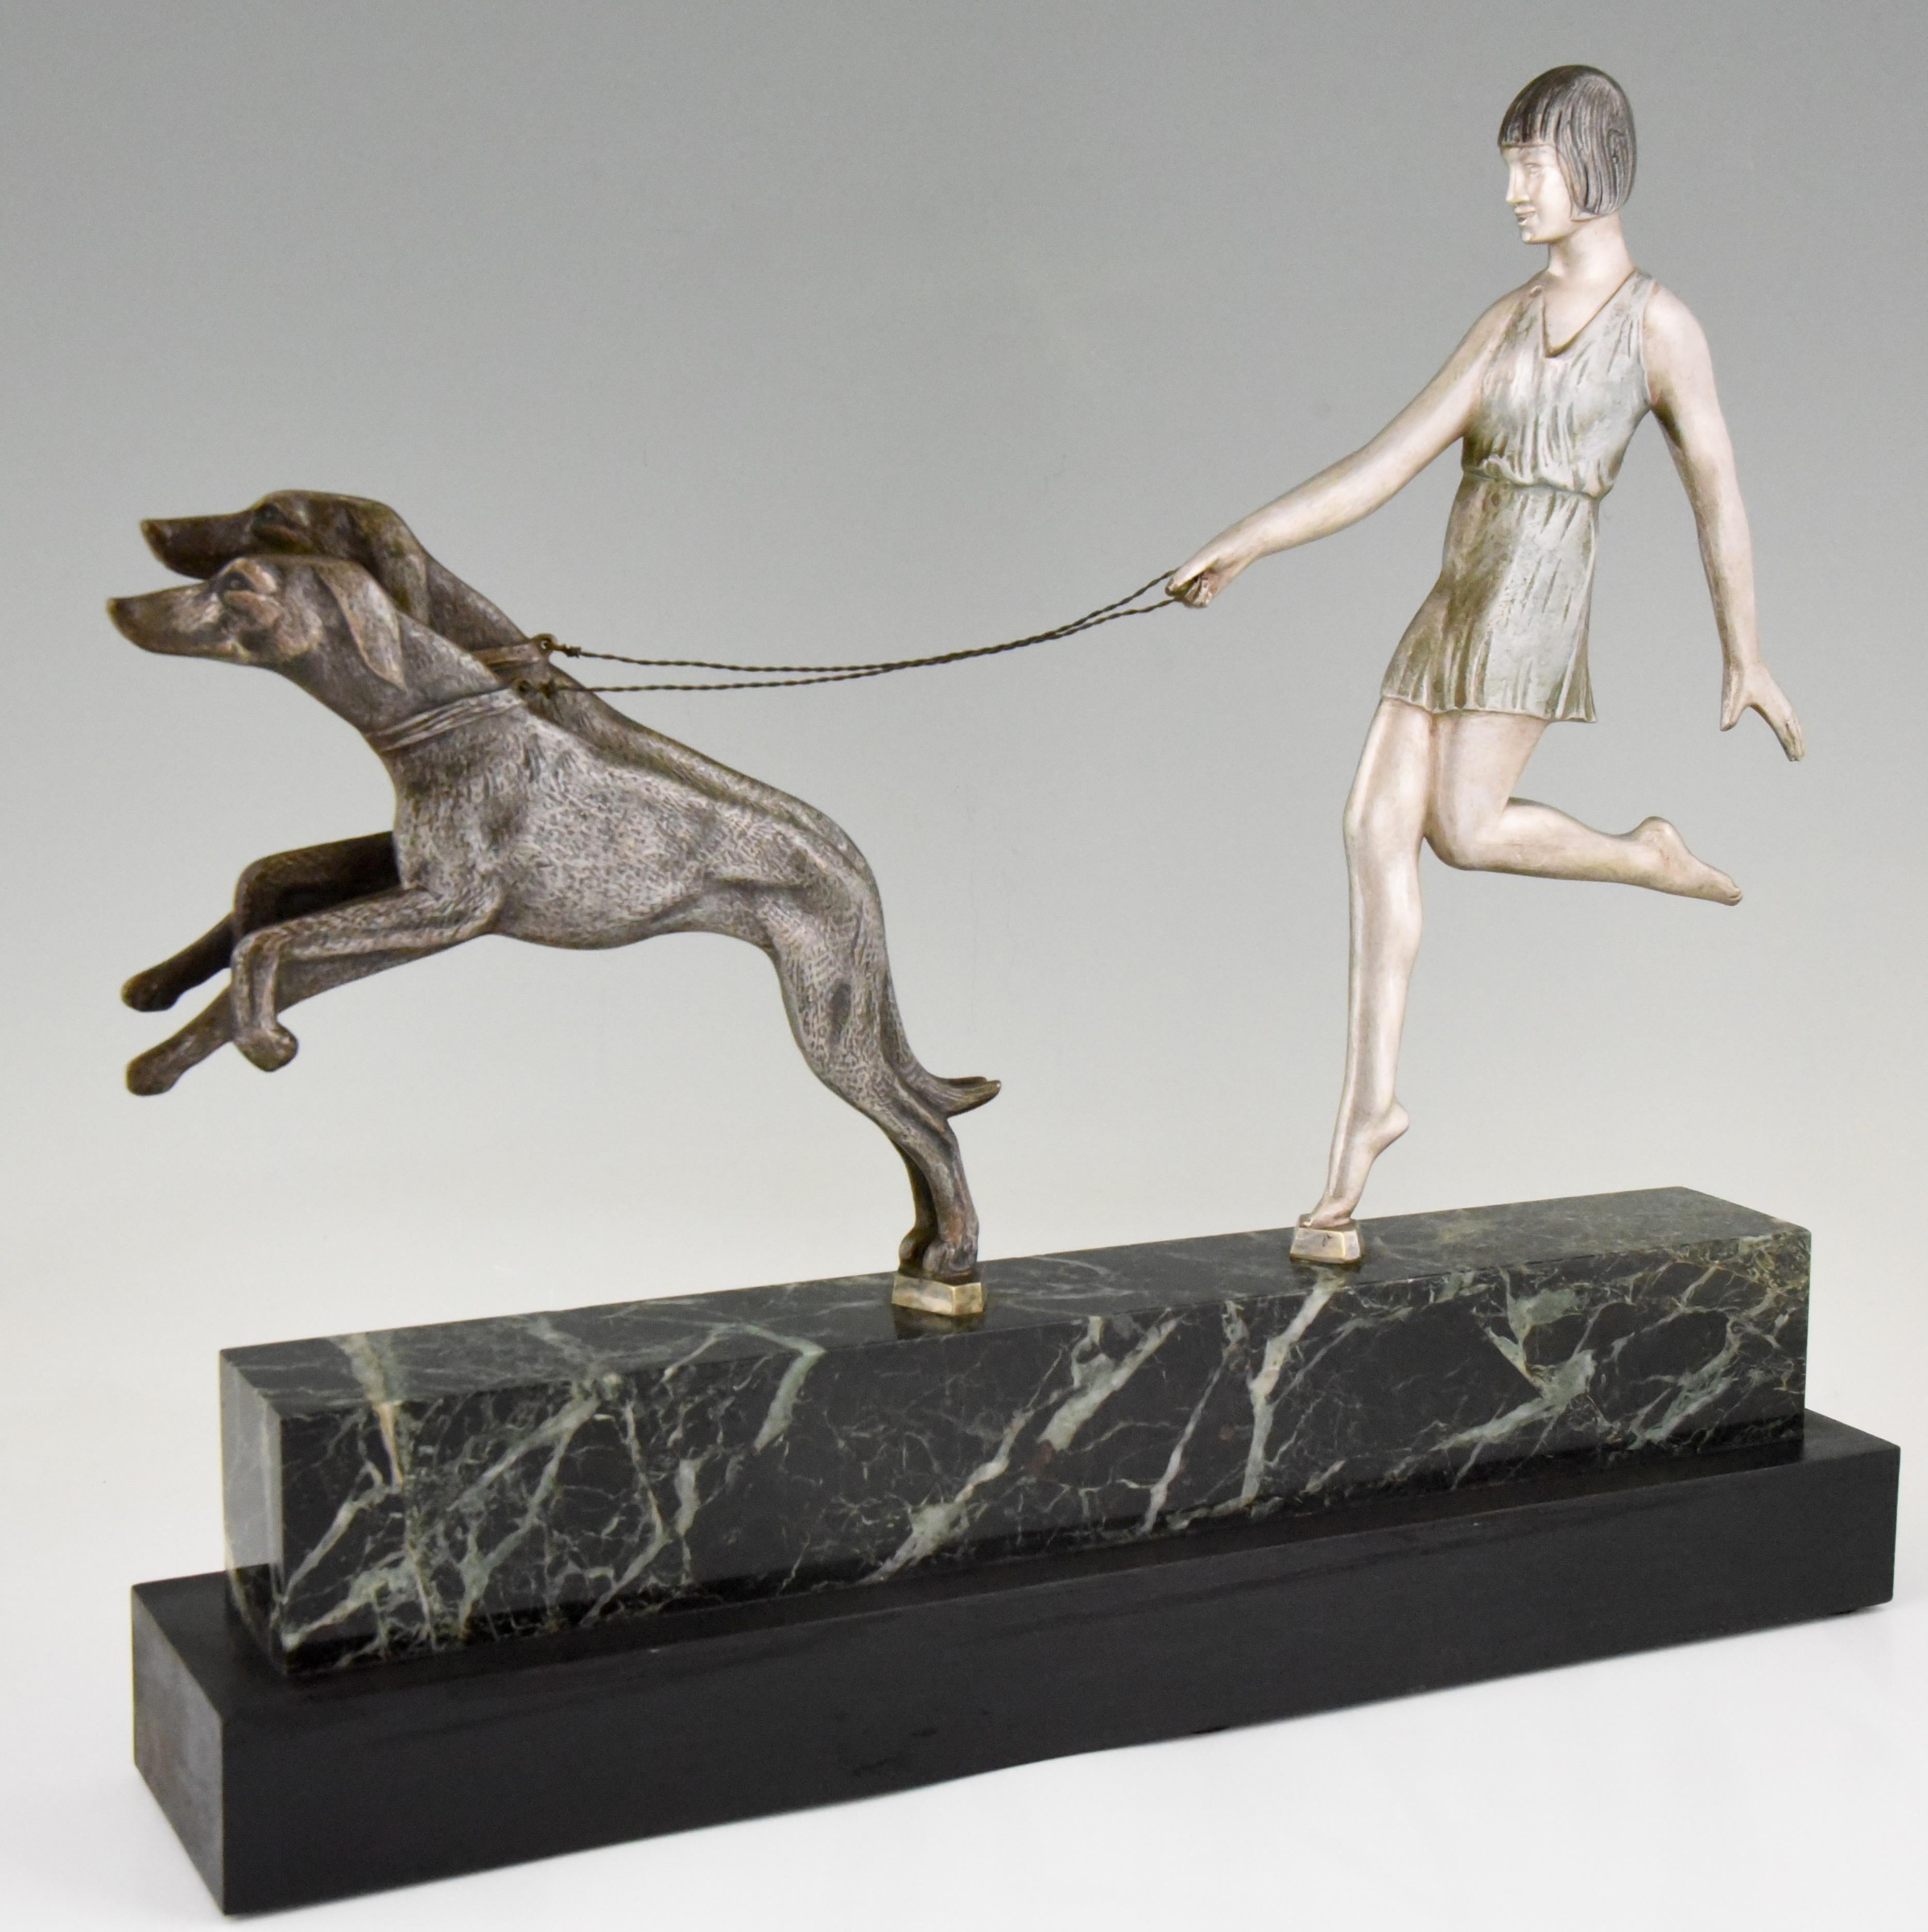 Typical Art Deco sculpture of a young girl with two greyhound dogs on a leash. The bronze sculpture has a beautiful multi color patina and stands on a marble and wooden base. The work is signed by the French artist Janle, circa 1930.